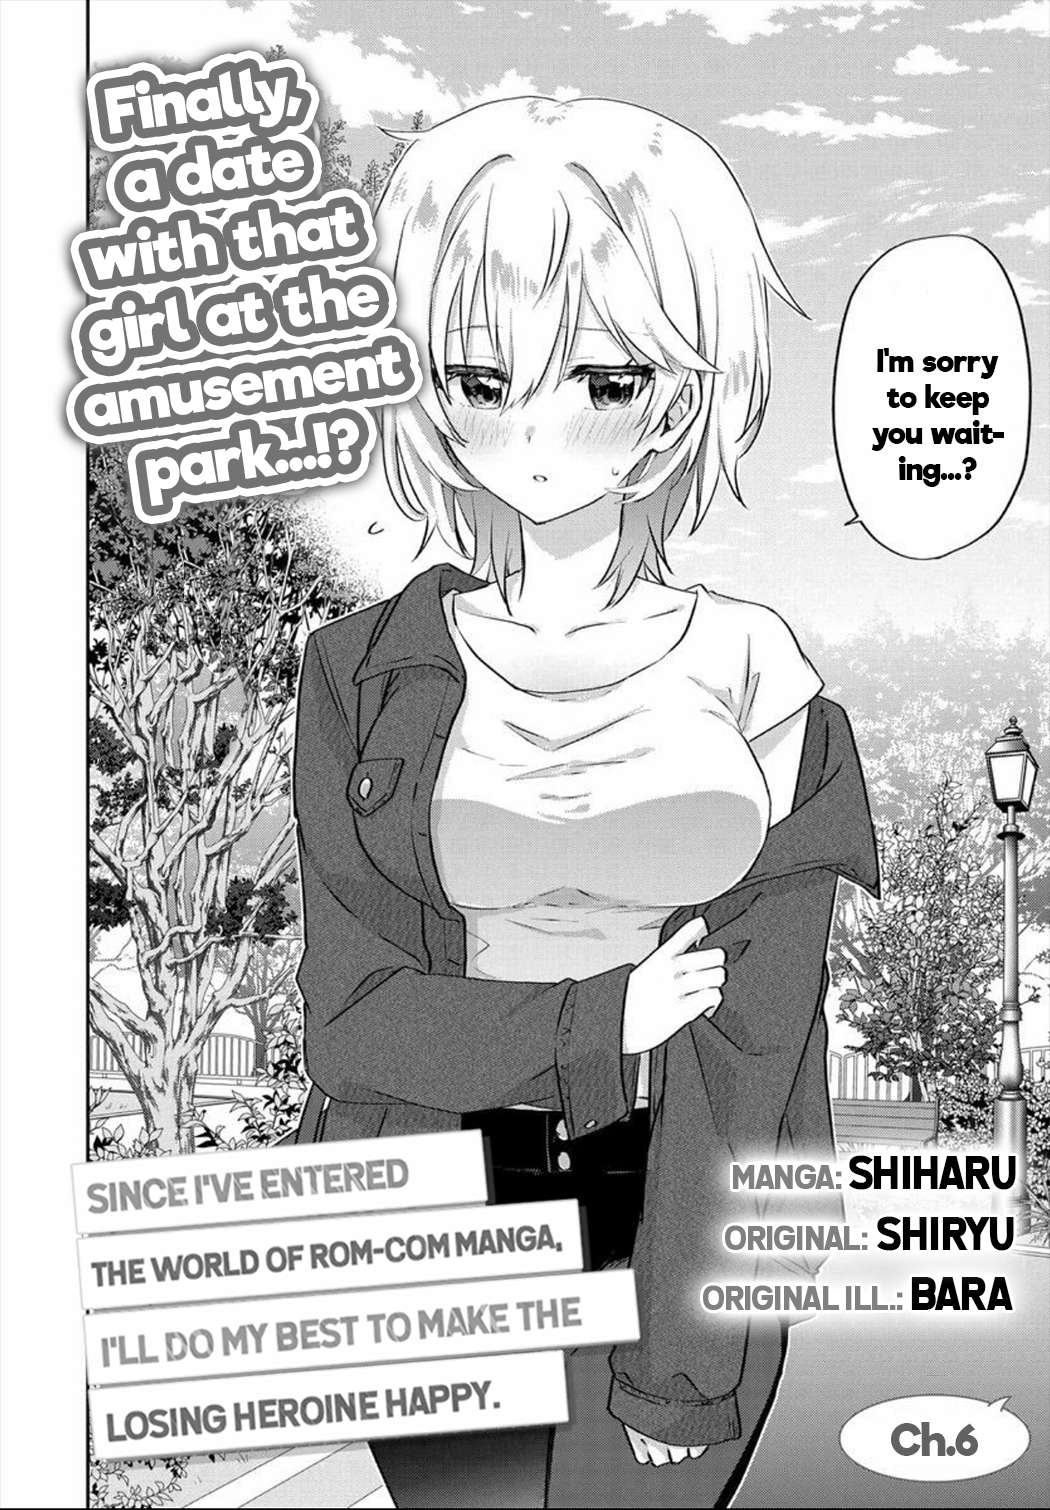 Since I’ve Entered the World of Romantic Comedy Manga, I’ll Do My Best to Make the Losing Heroine Happy. - chapter 6.1 - #2